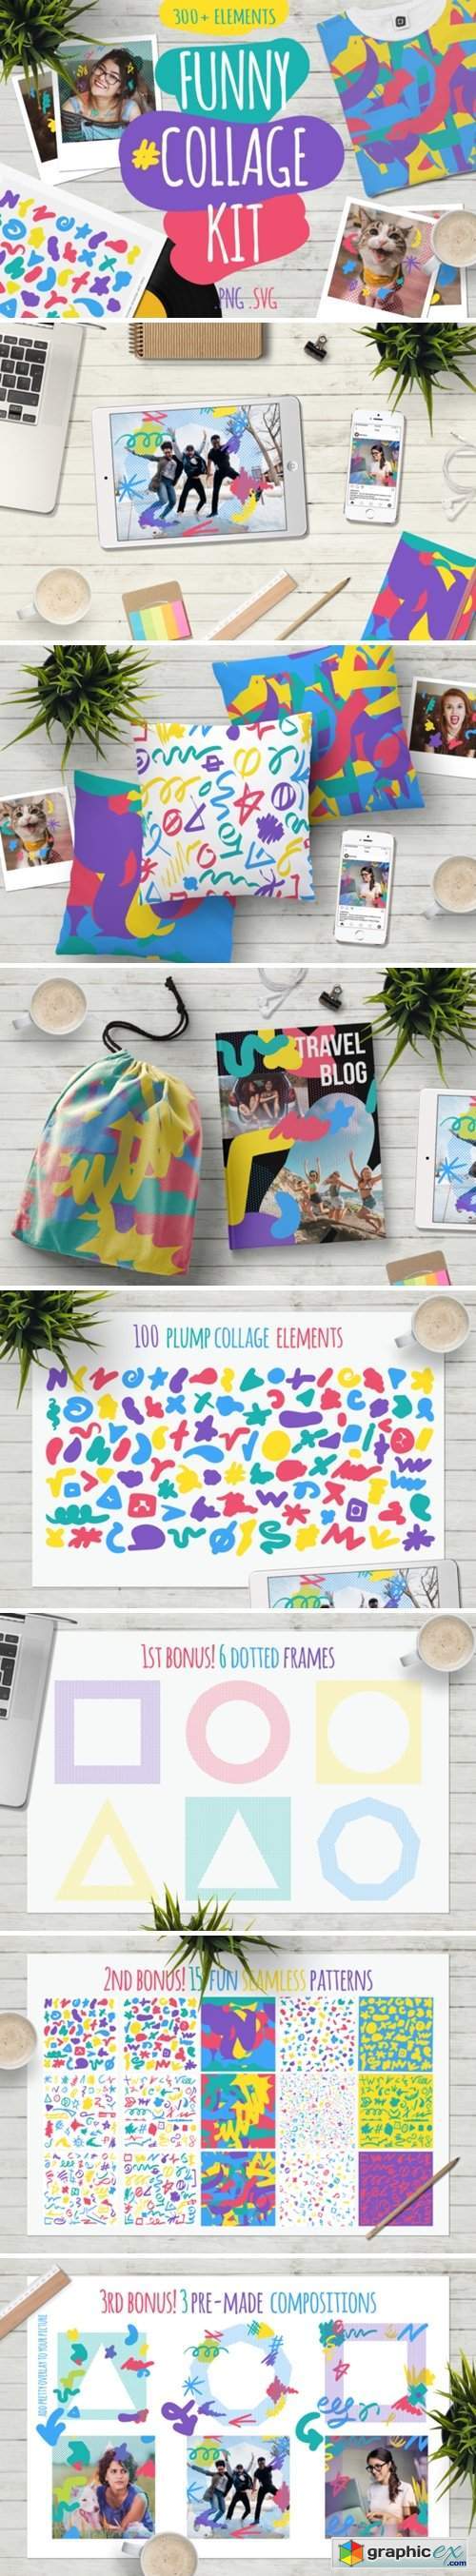 Funny Collage Kit